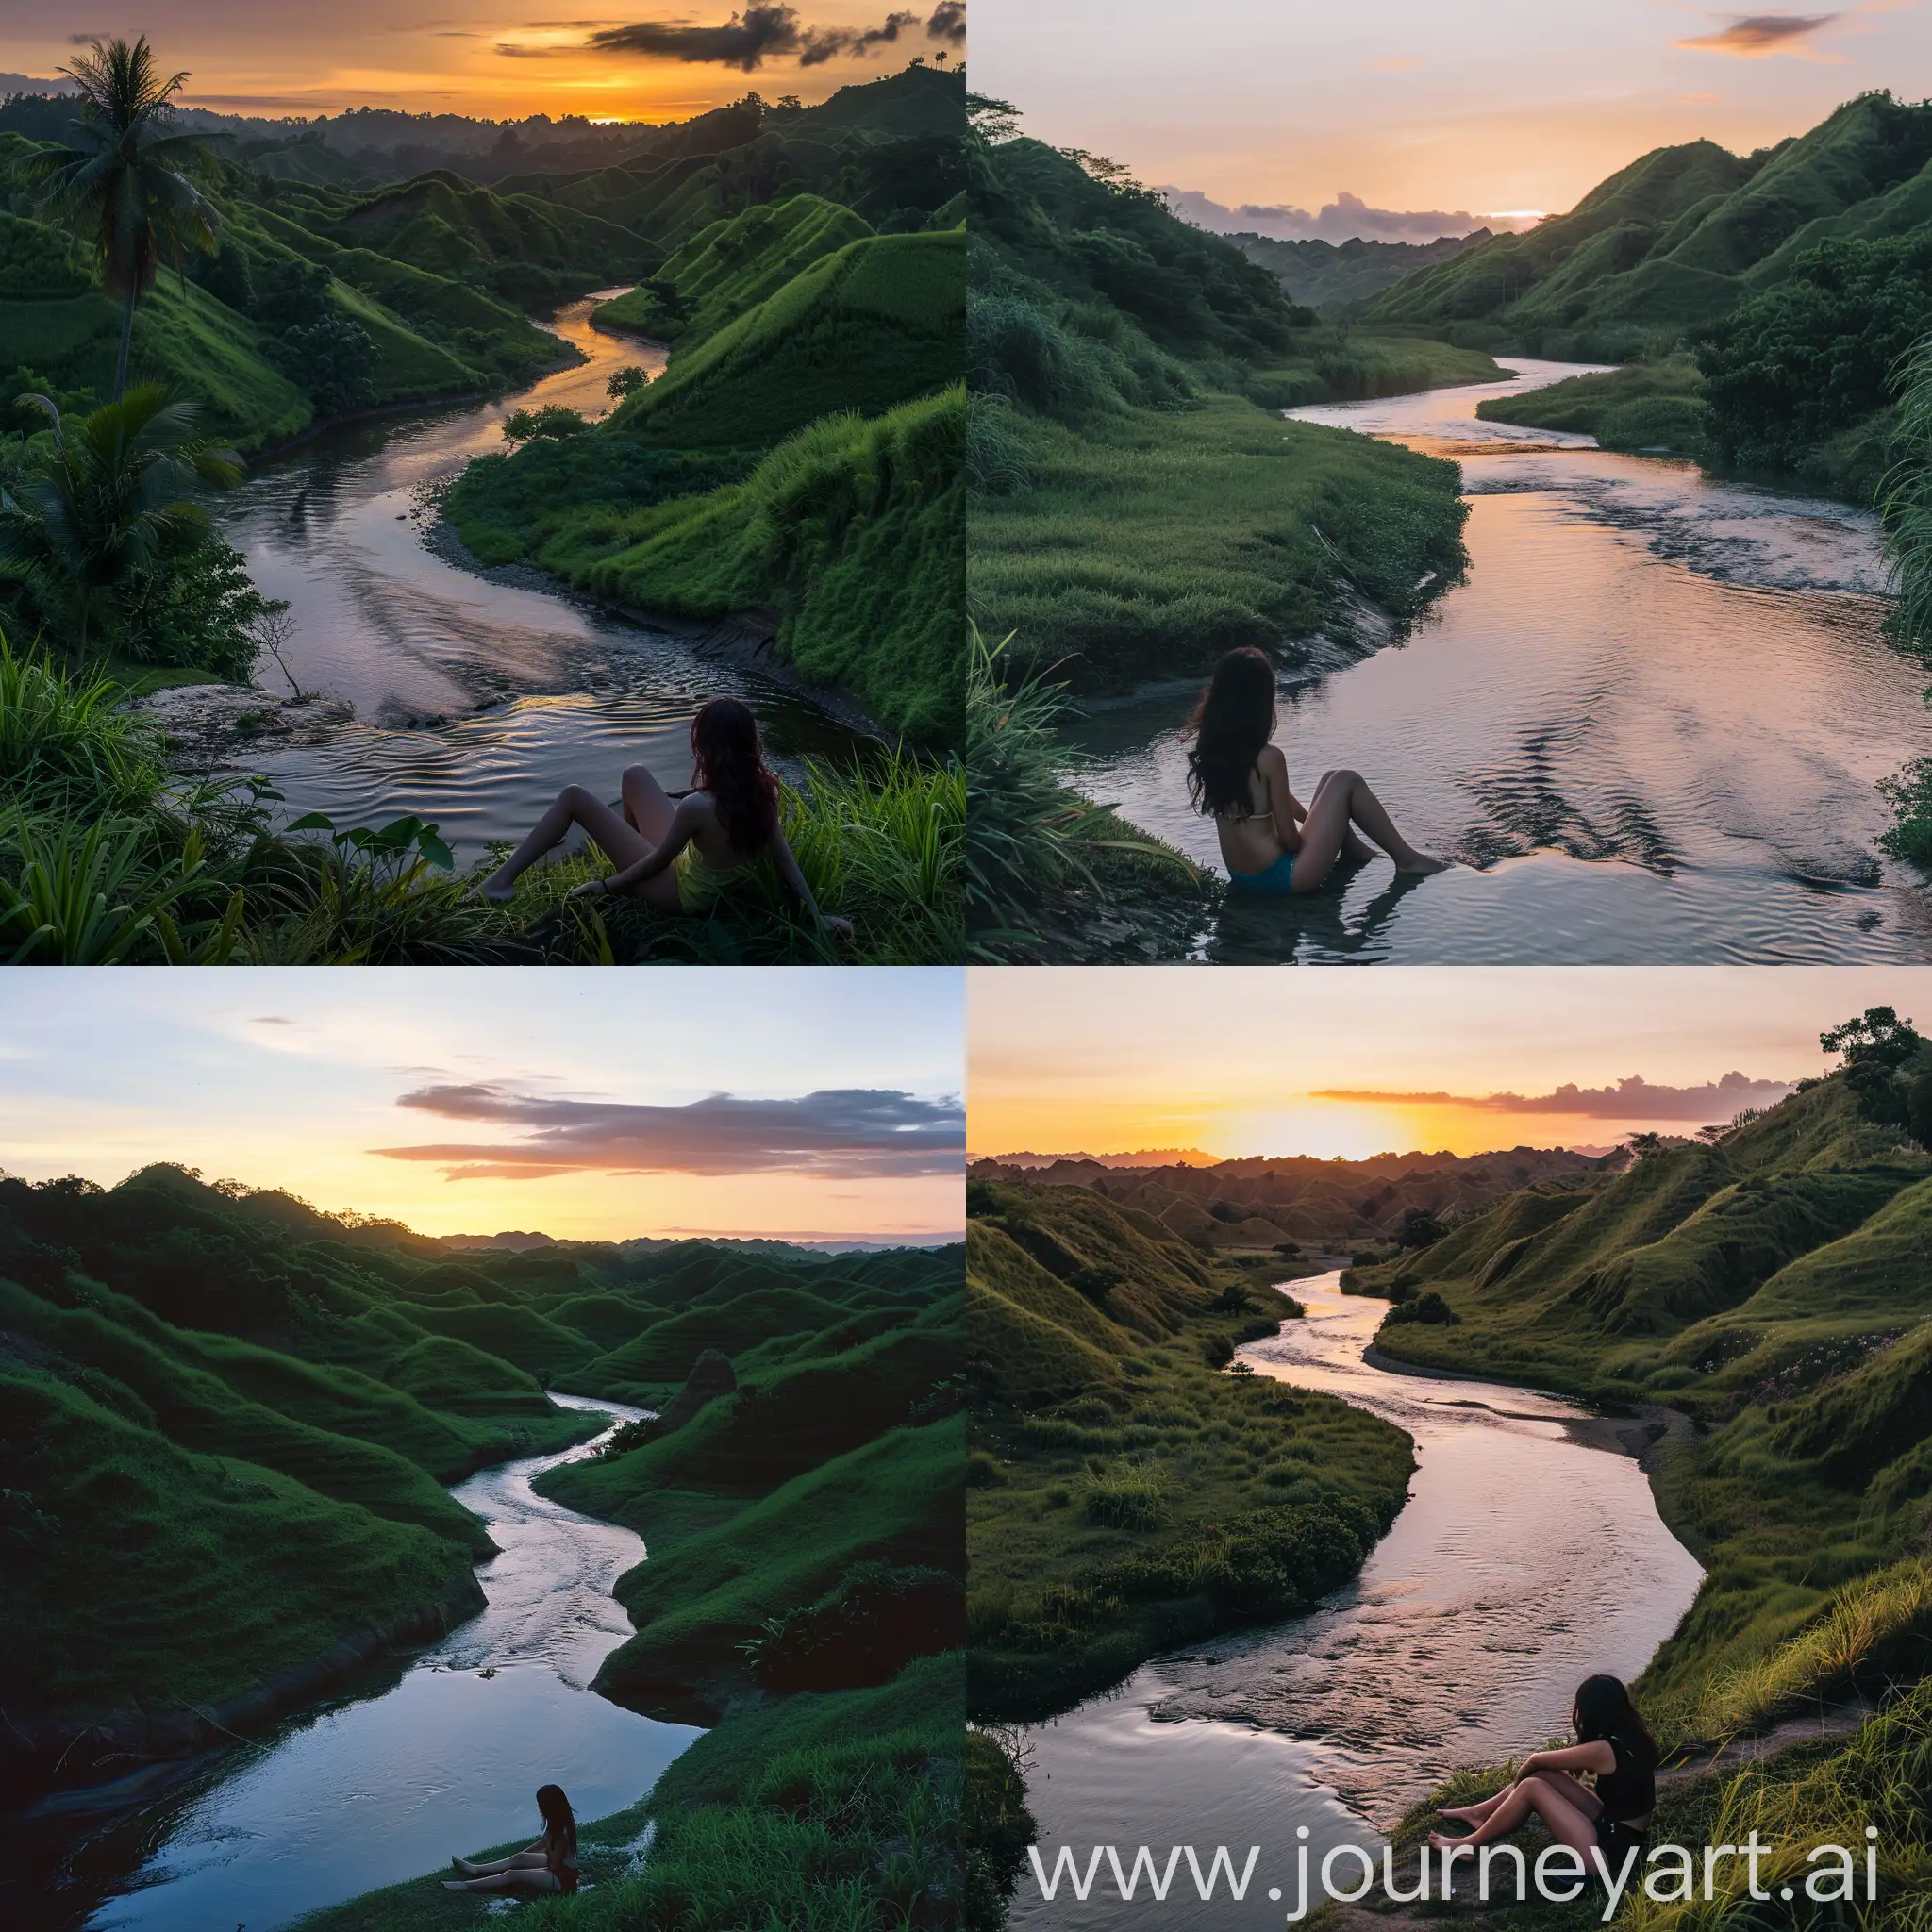 A serene landscape of a winding river cutting through lush, green hills at sunset. a lone 25 year old asian girl sat by the river, her legs submerged to the water